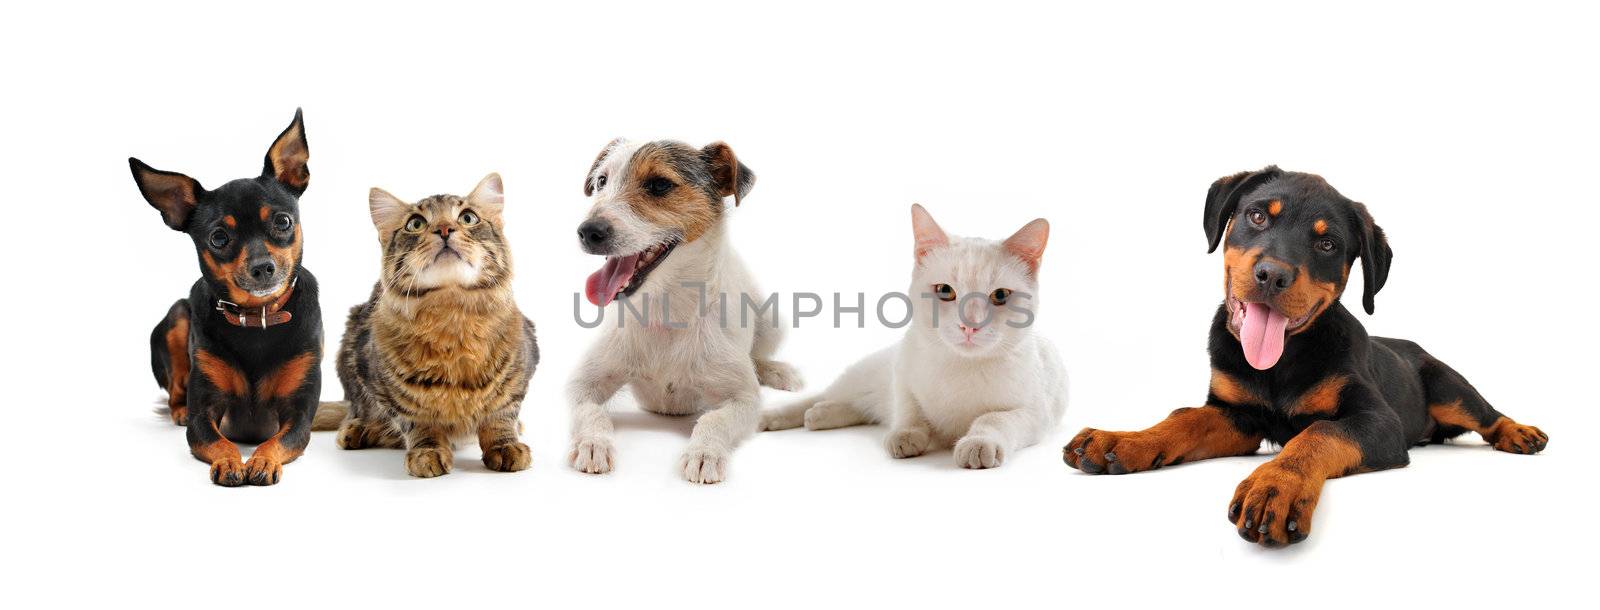 group of puppies and cats on a white background